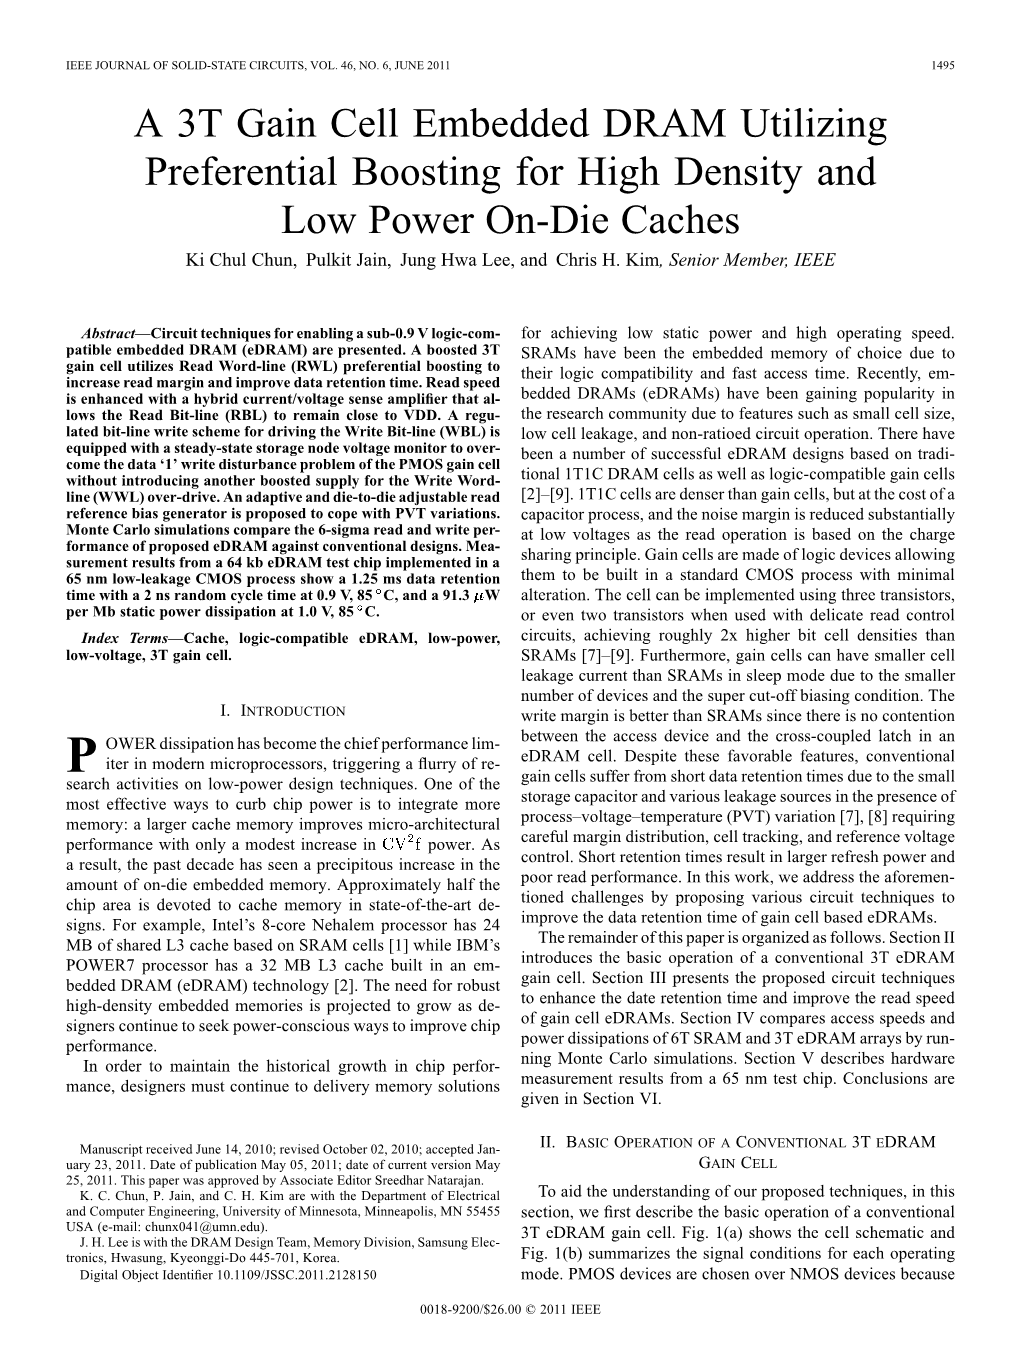 A 3T Gain Cell Embedded DRAM Utilizing Preferential Boosting for High Density and Low Power On-Die Caches Ki Chul Chun, Pulkit Jain, Jung Hwa Lee, and Chris H